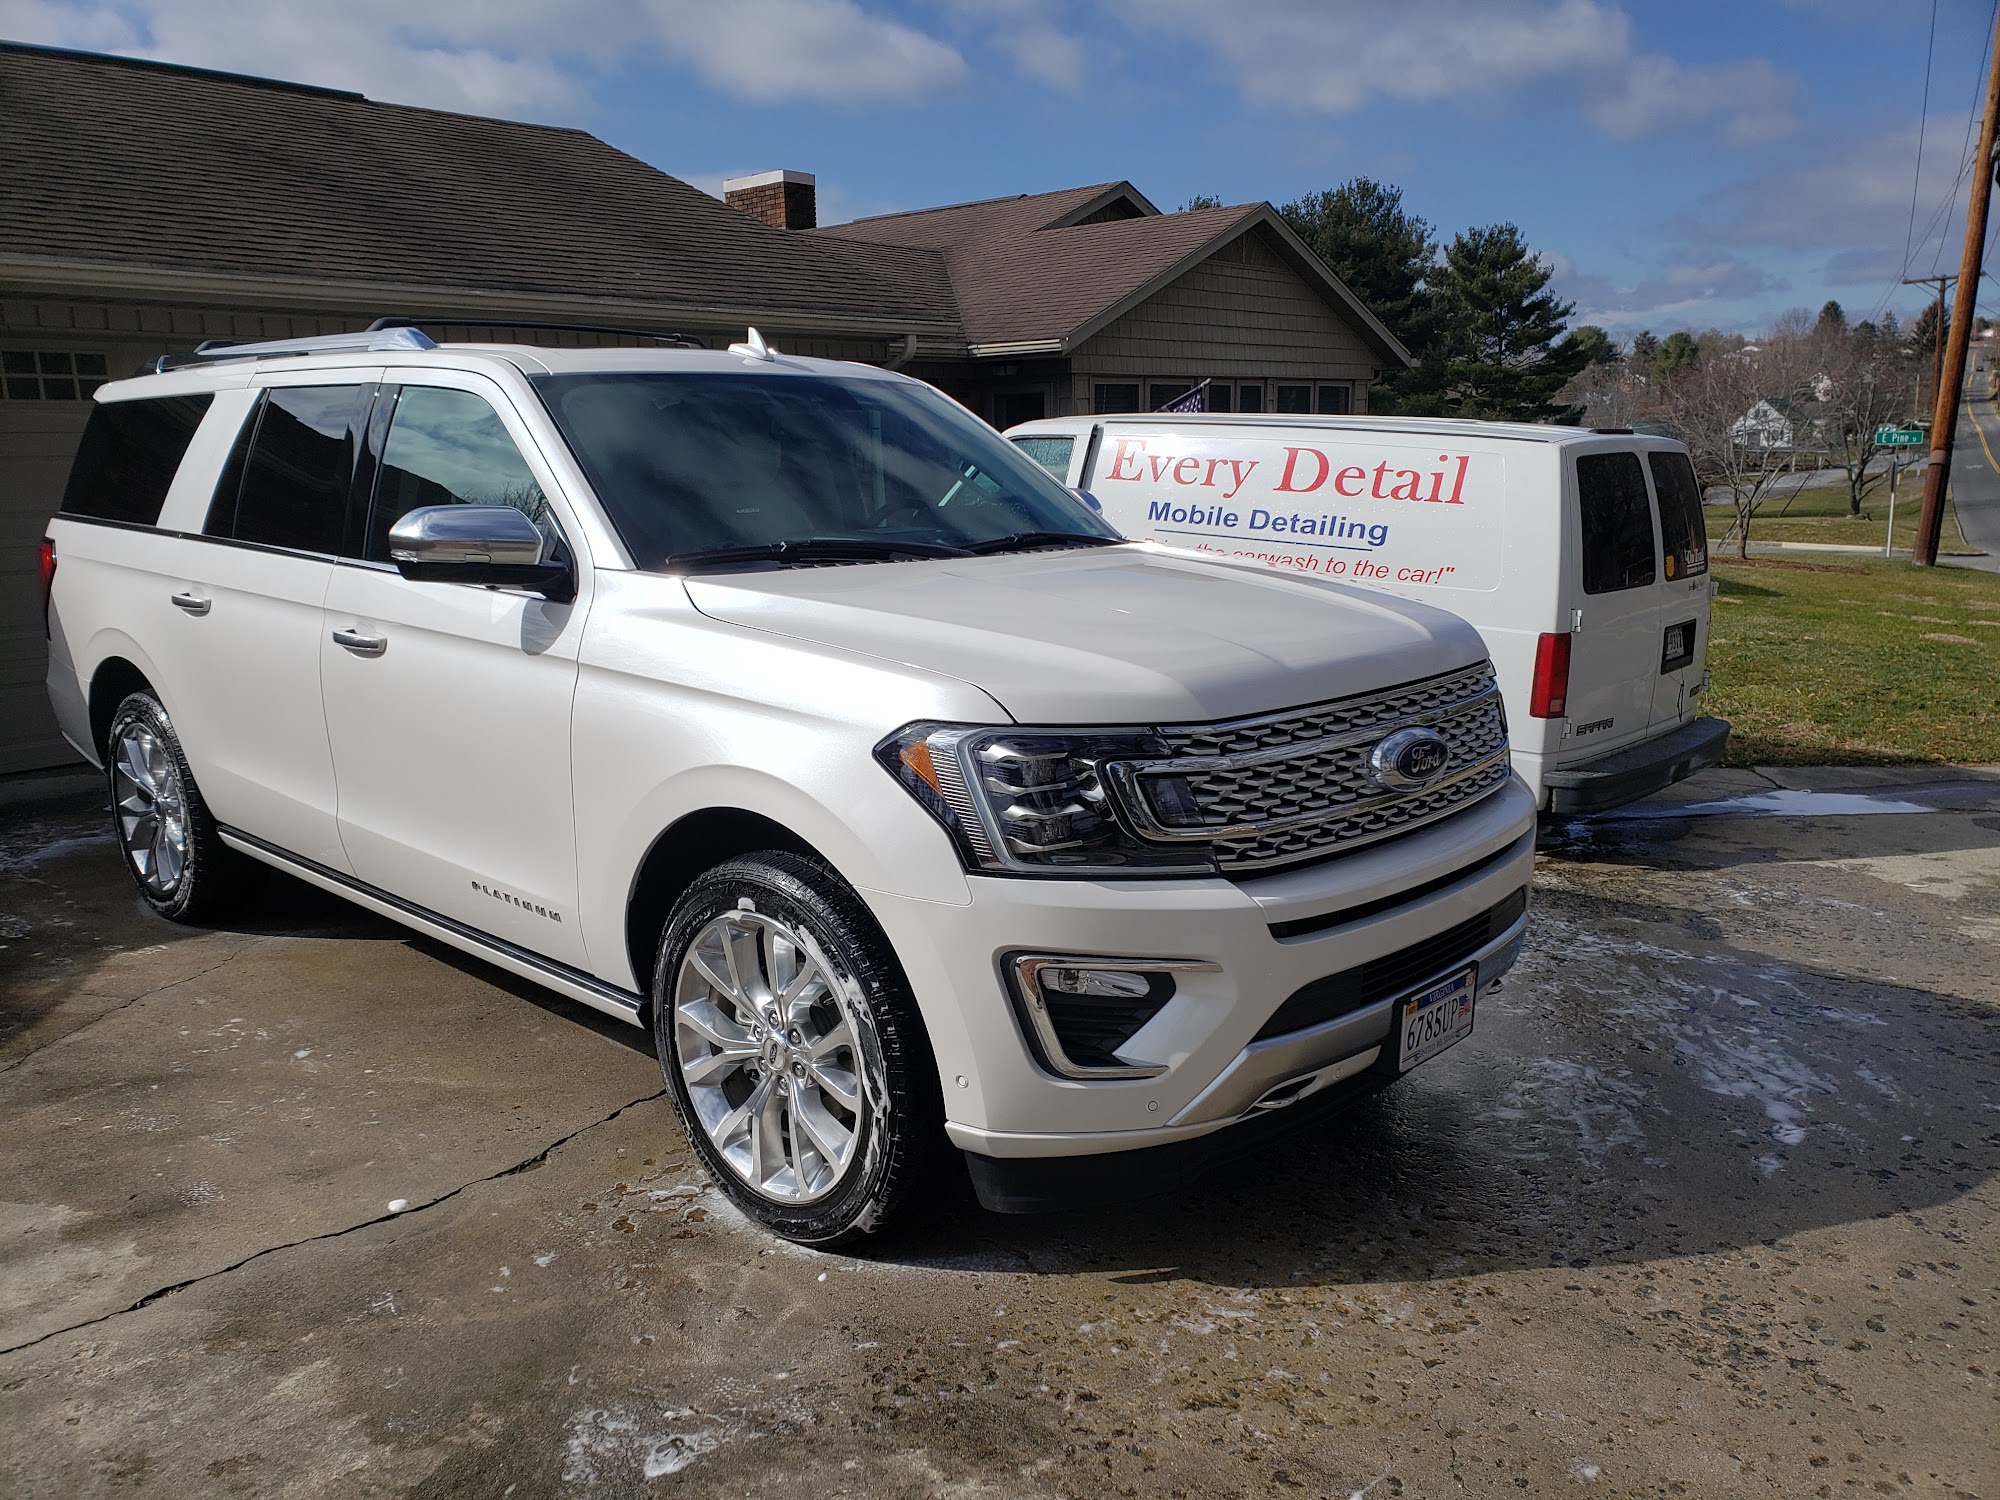 Every Detail Mobile Car Wash